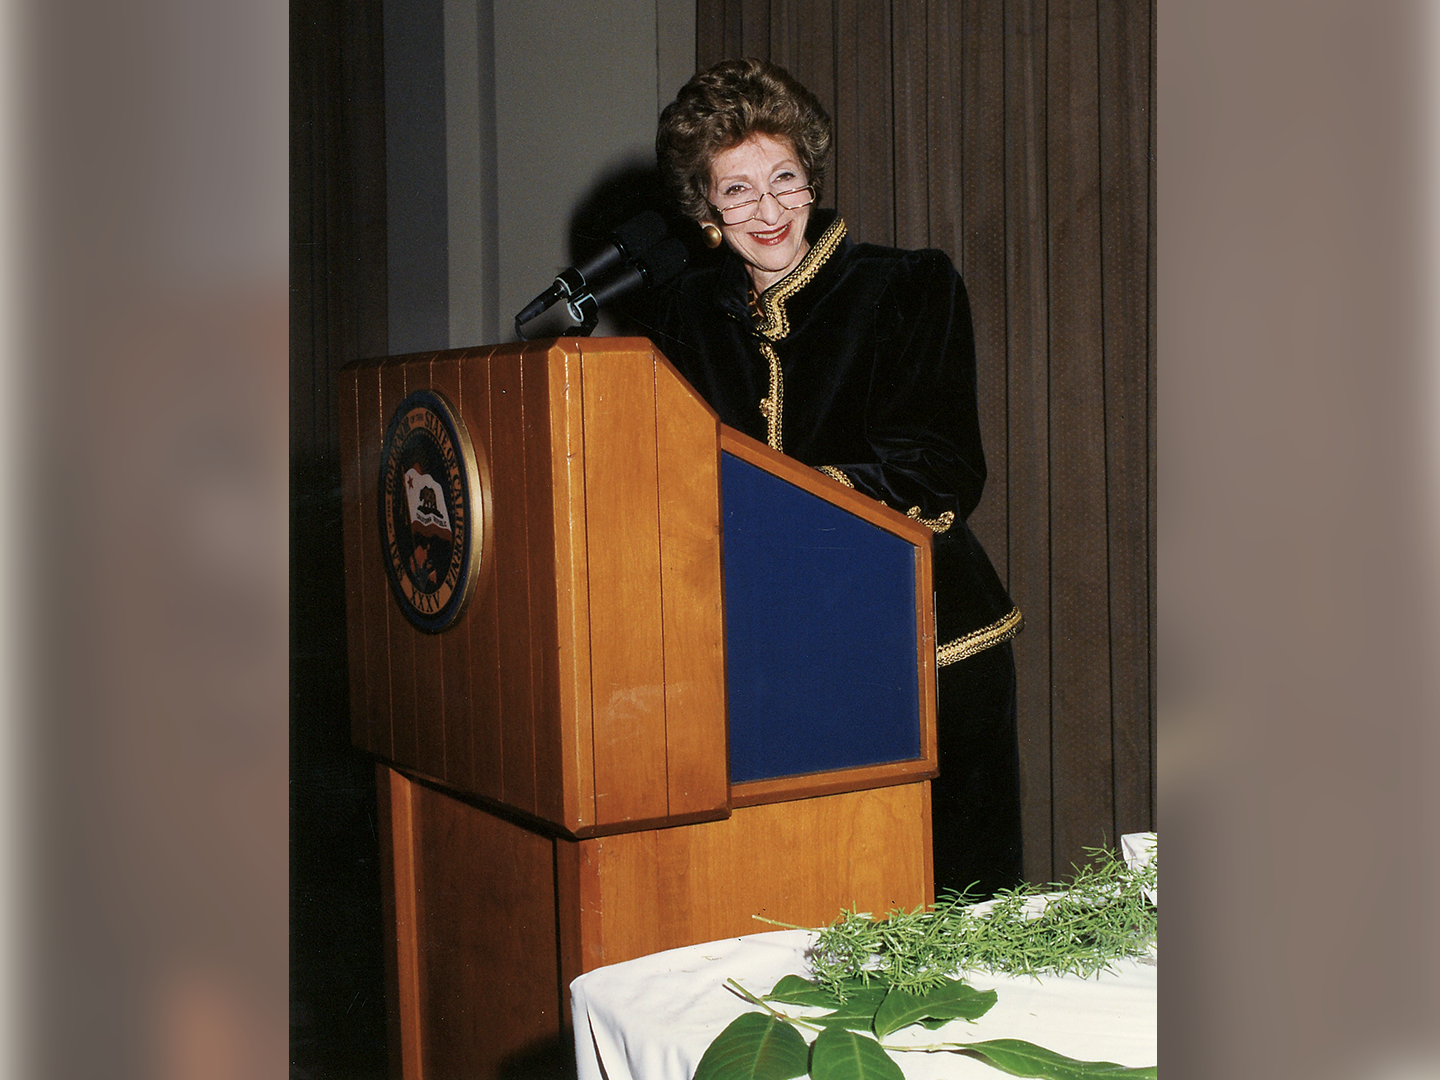 Simone addressing guests at a gala honoring